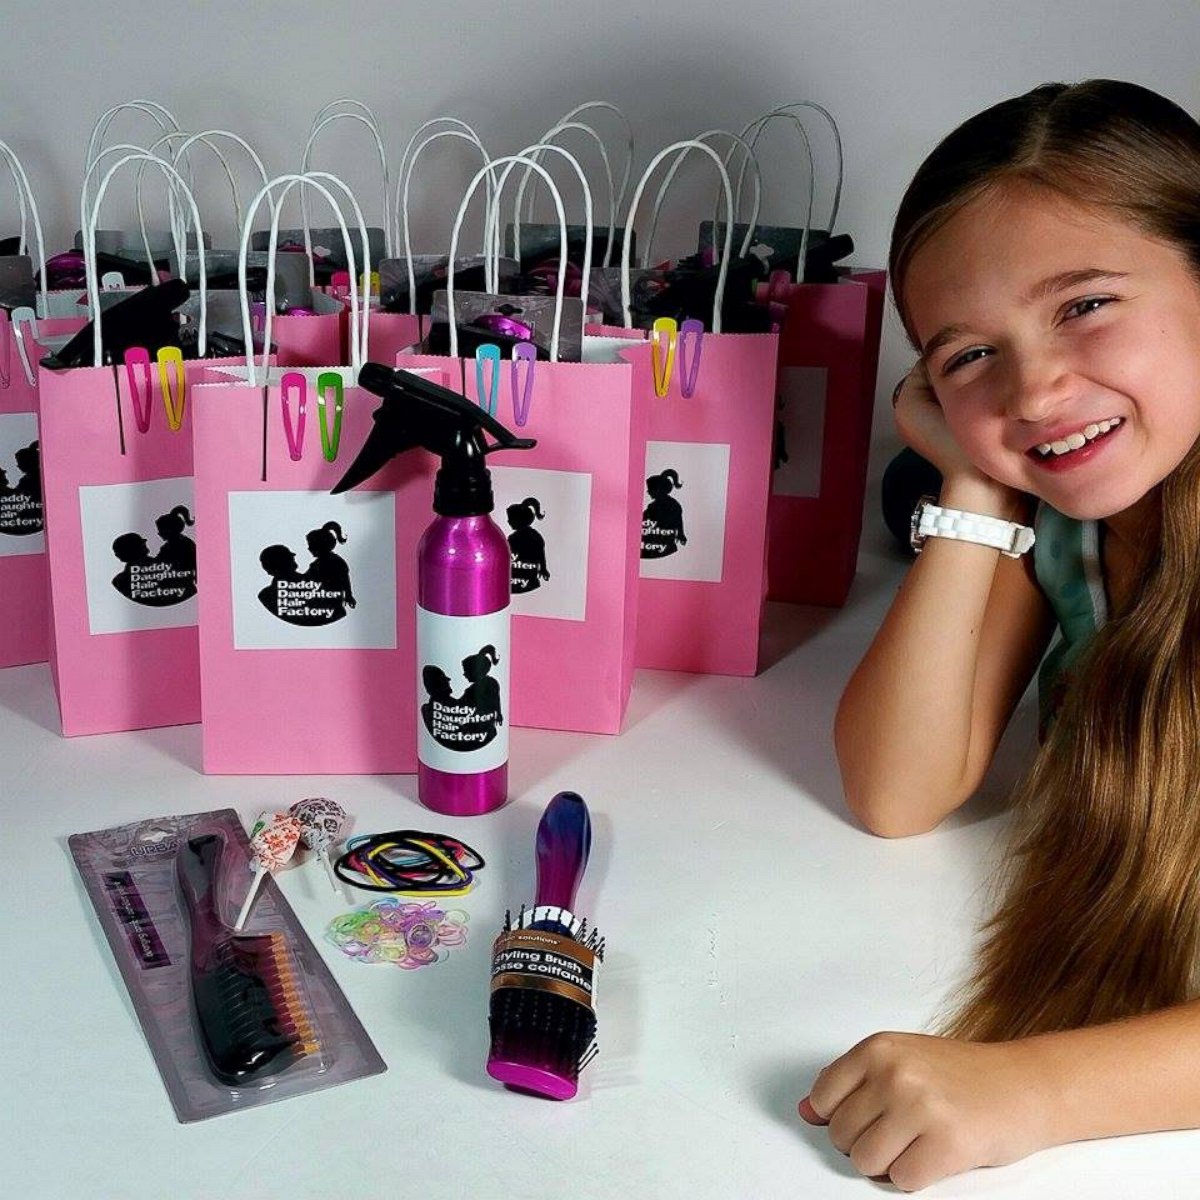 PHOTO: Emma Morgese poses in front of the "Daddy Daughter Hair Factory" goody bags.